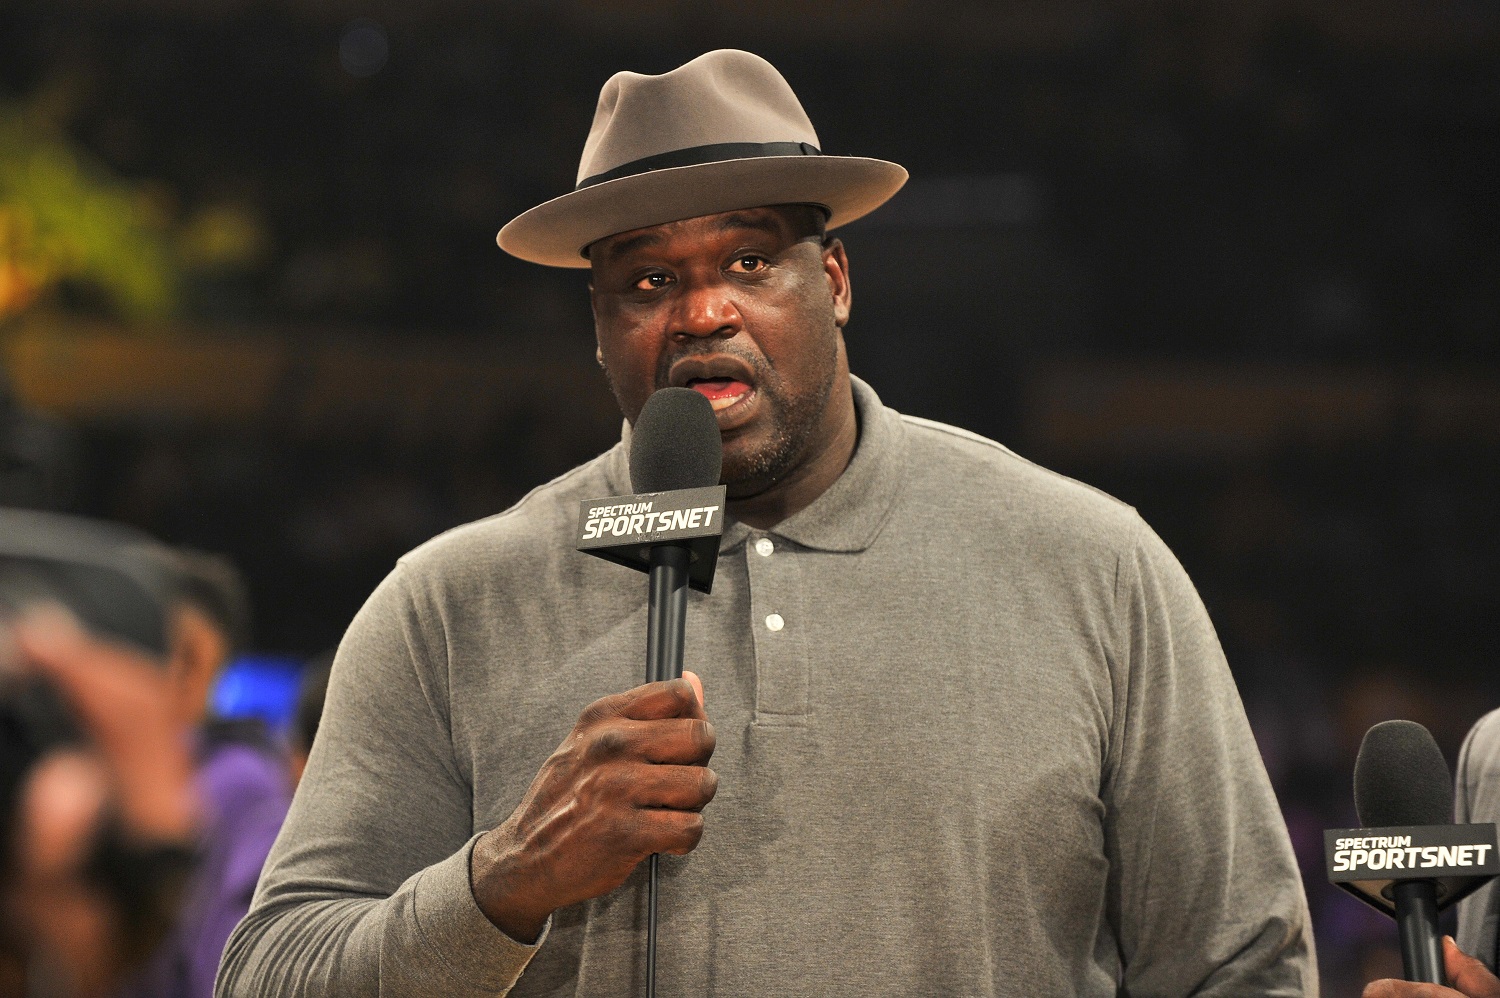 Shaquille O'Neal attends a basketball game between the Los Angeles Lakers and Golden State Warriors at Staples Center on Dec. 18, 2017.